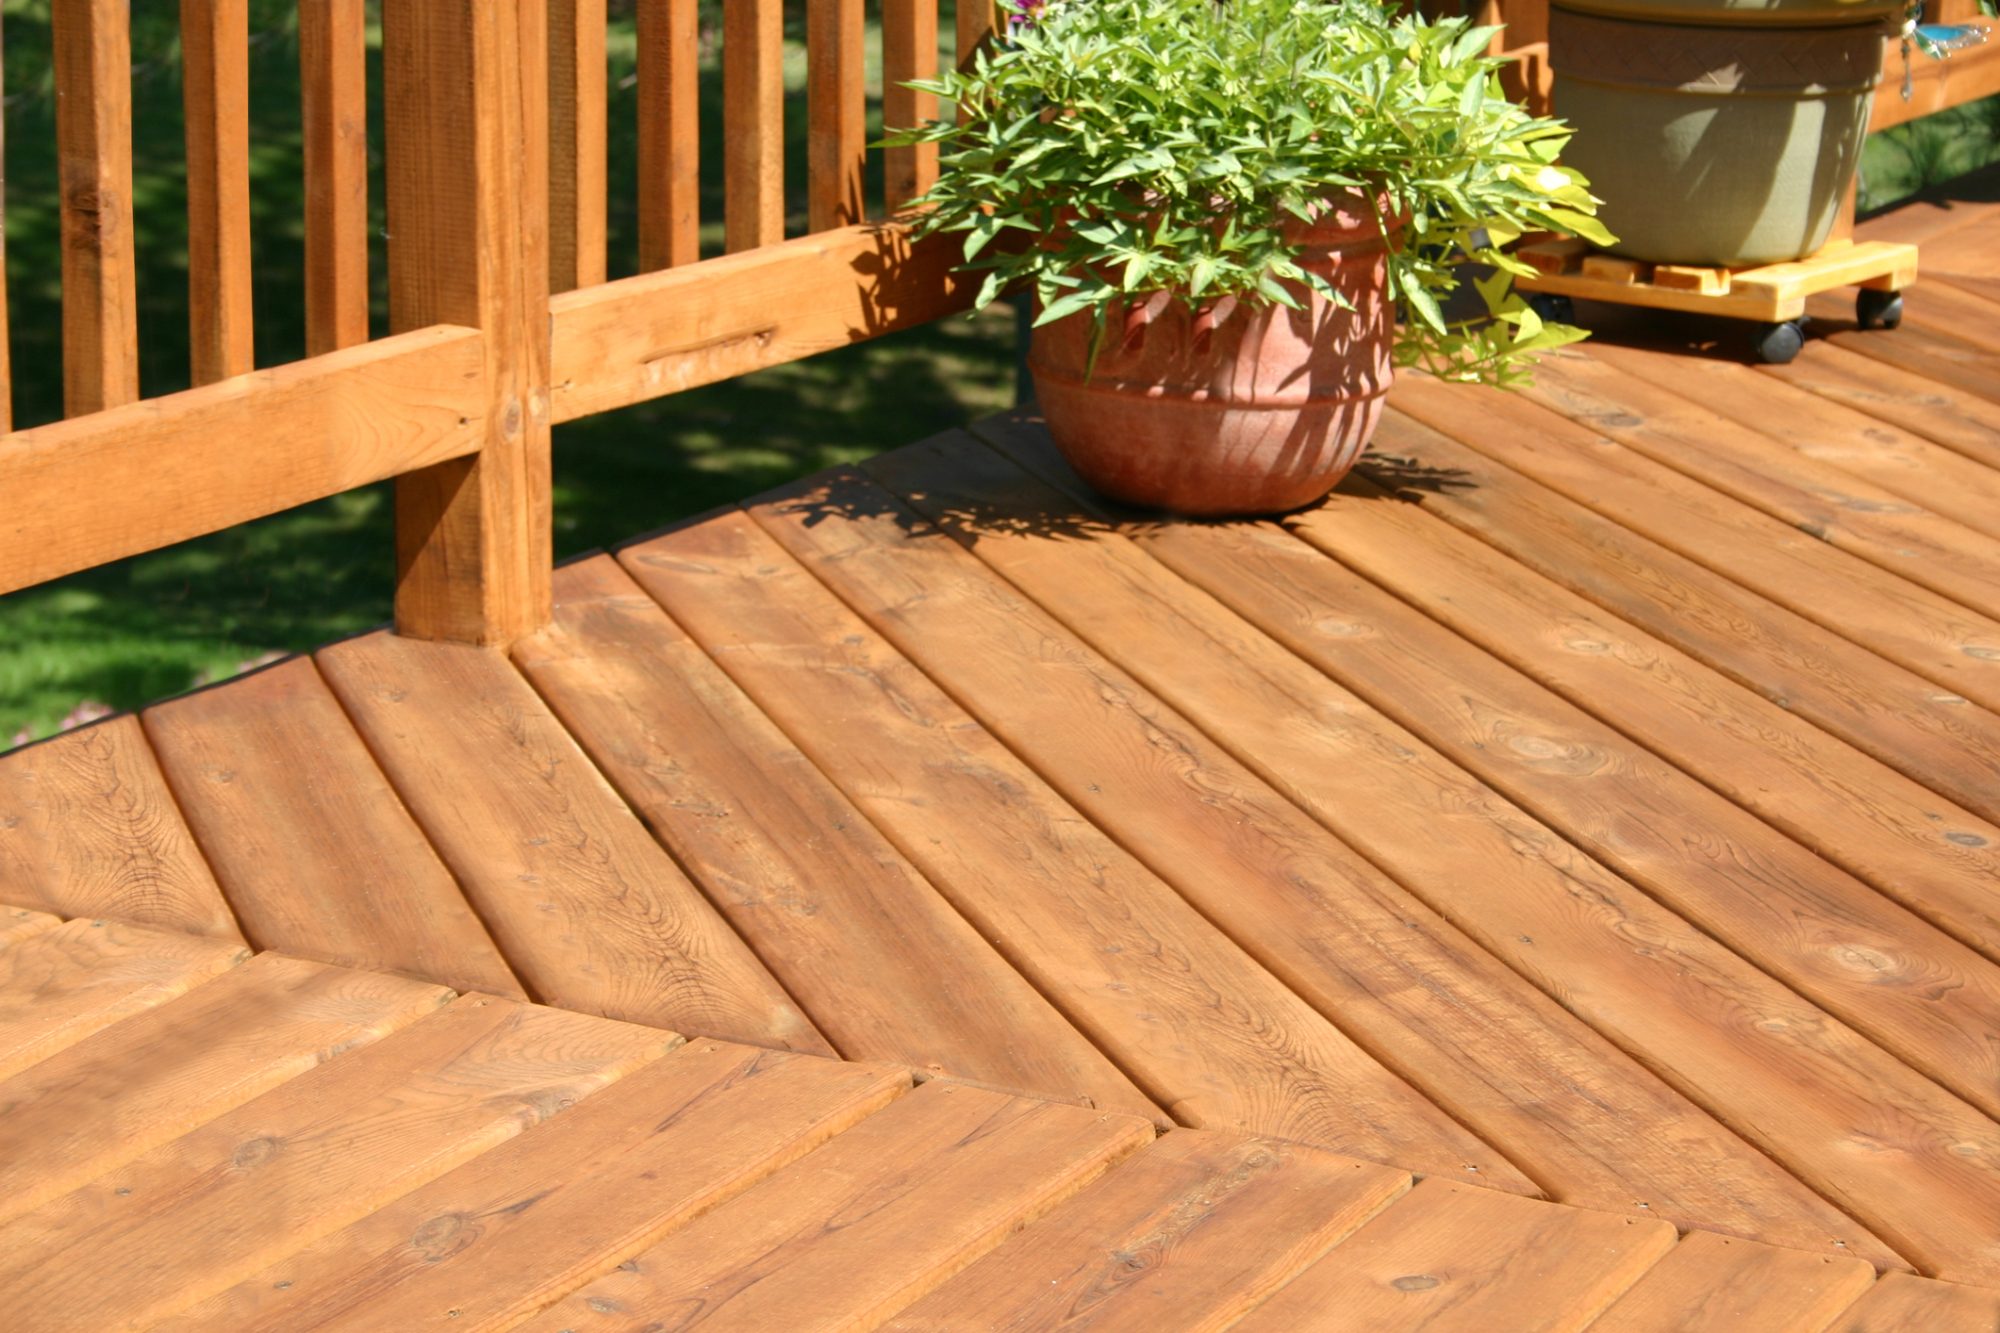 A pine colored deck with some plants